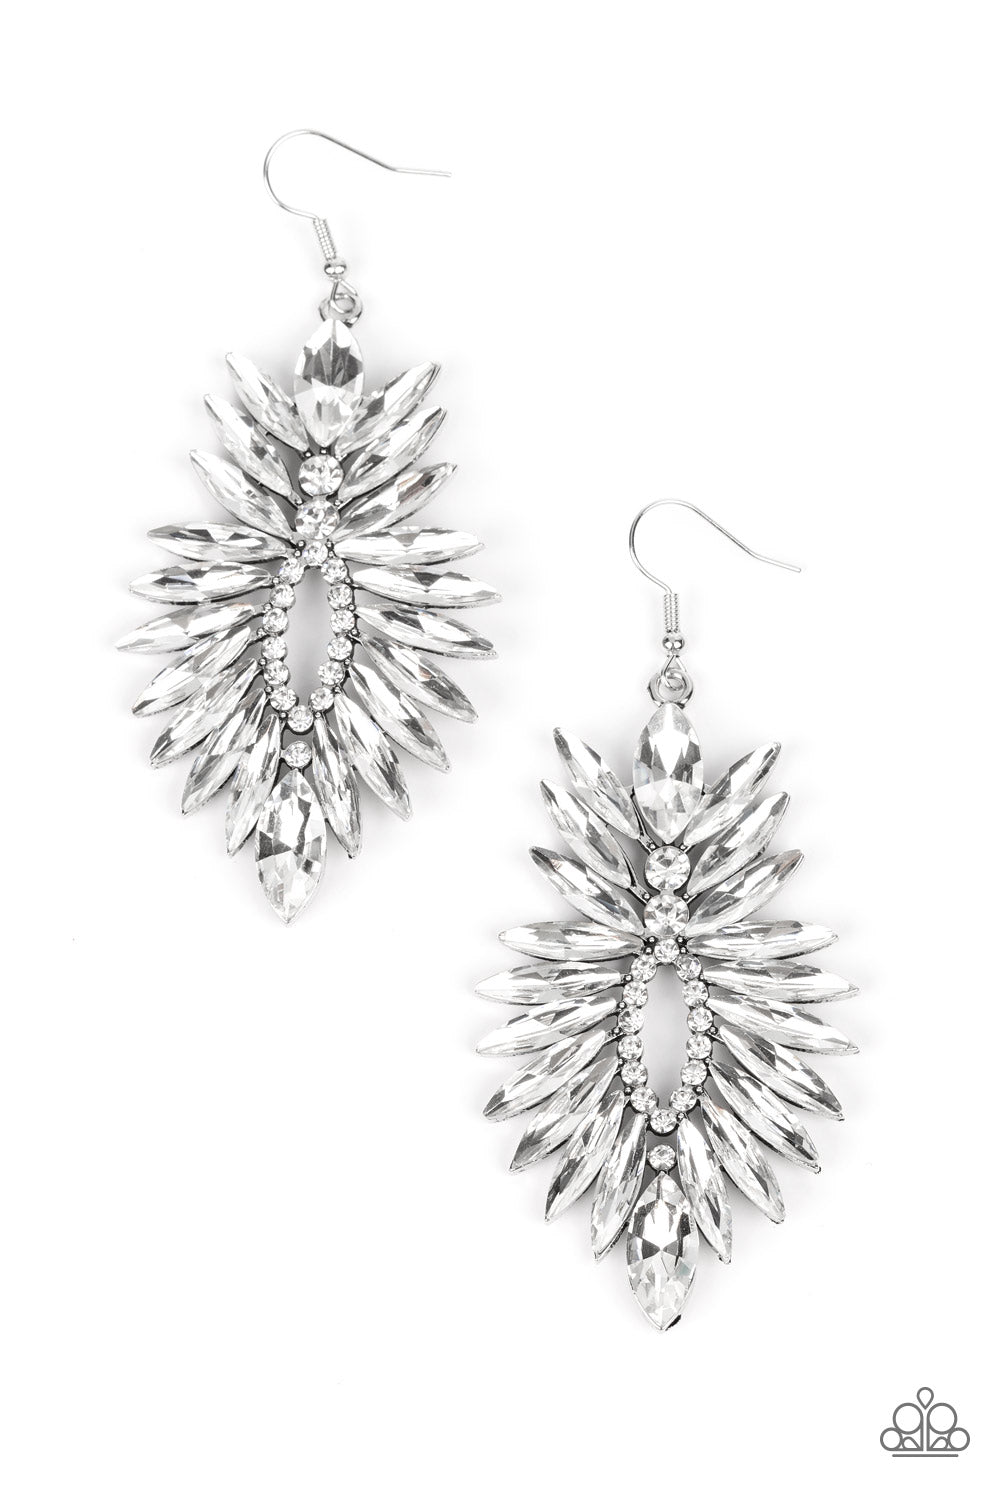 Turn up the Luxe - White Icy and Silver Earrings - Paparazzi Accessories Bejeweled Accessories By Kristie - An explosion of white marquise rhinestones flares out from a ring of dainty white rhinestones, coalescing into an irresistibly icy statement piece. Earring attaches to a standard fishhook fitting. Sold as one pair of earrings.